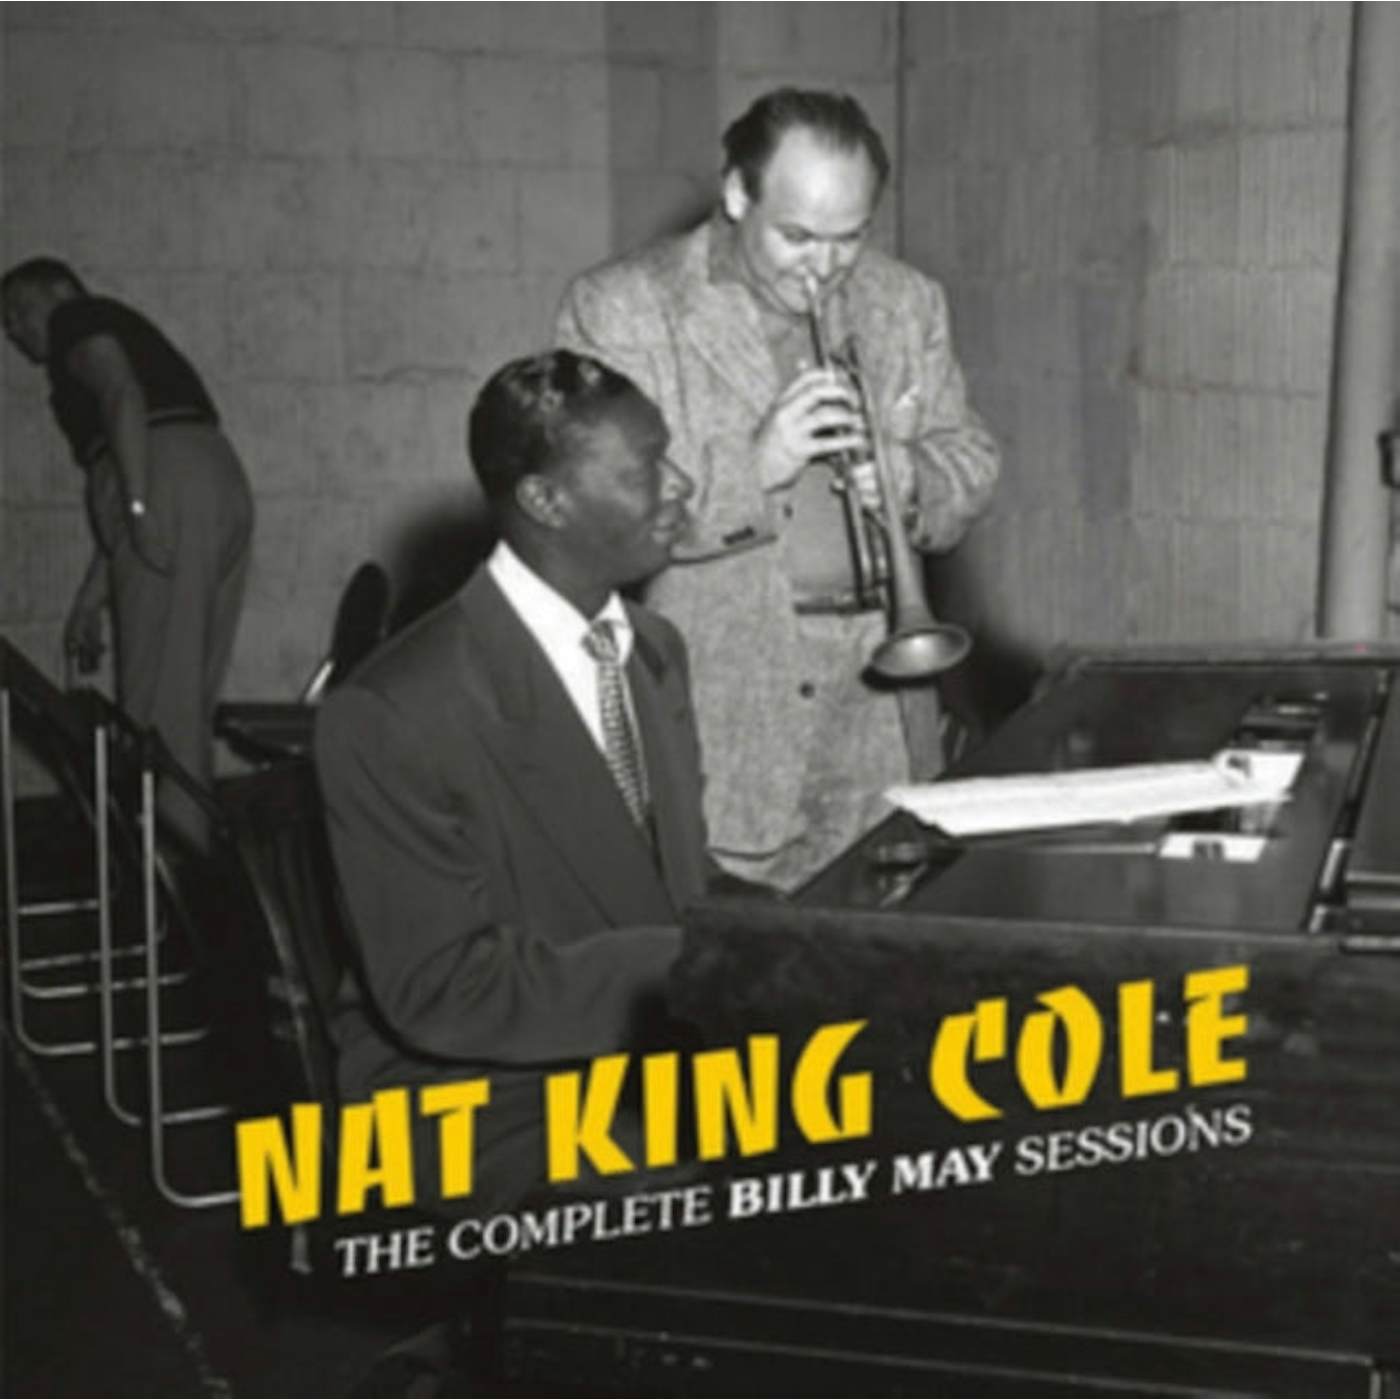 Nat King Cole CD - The Complete Billy May Sessions